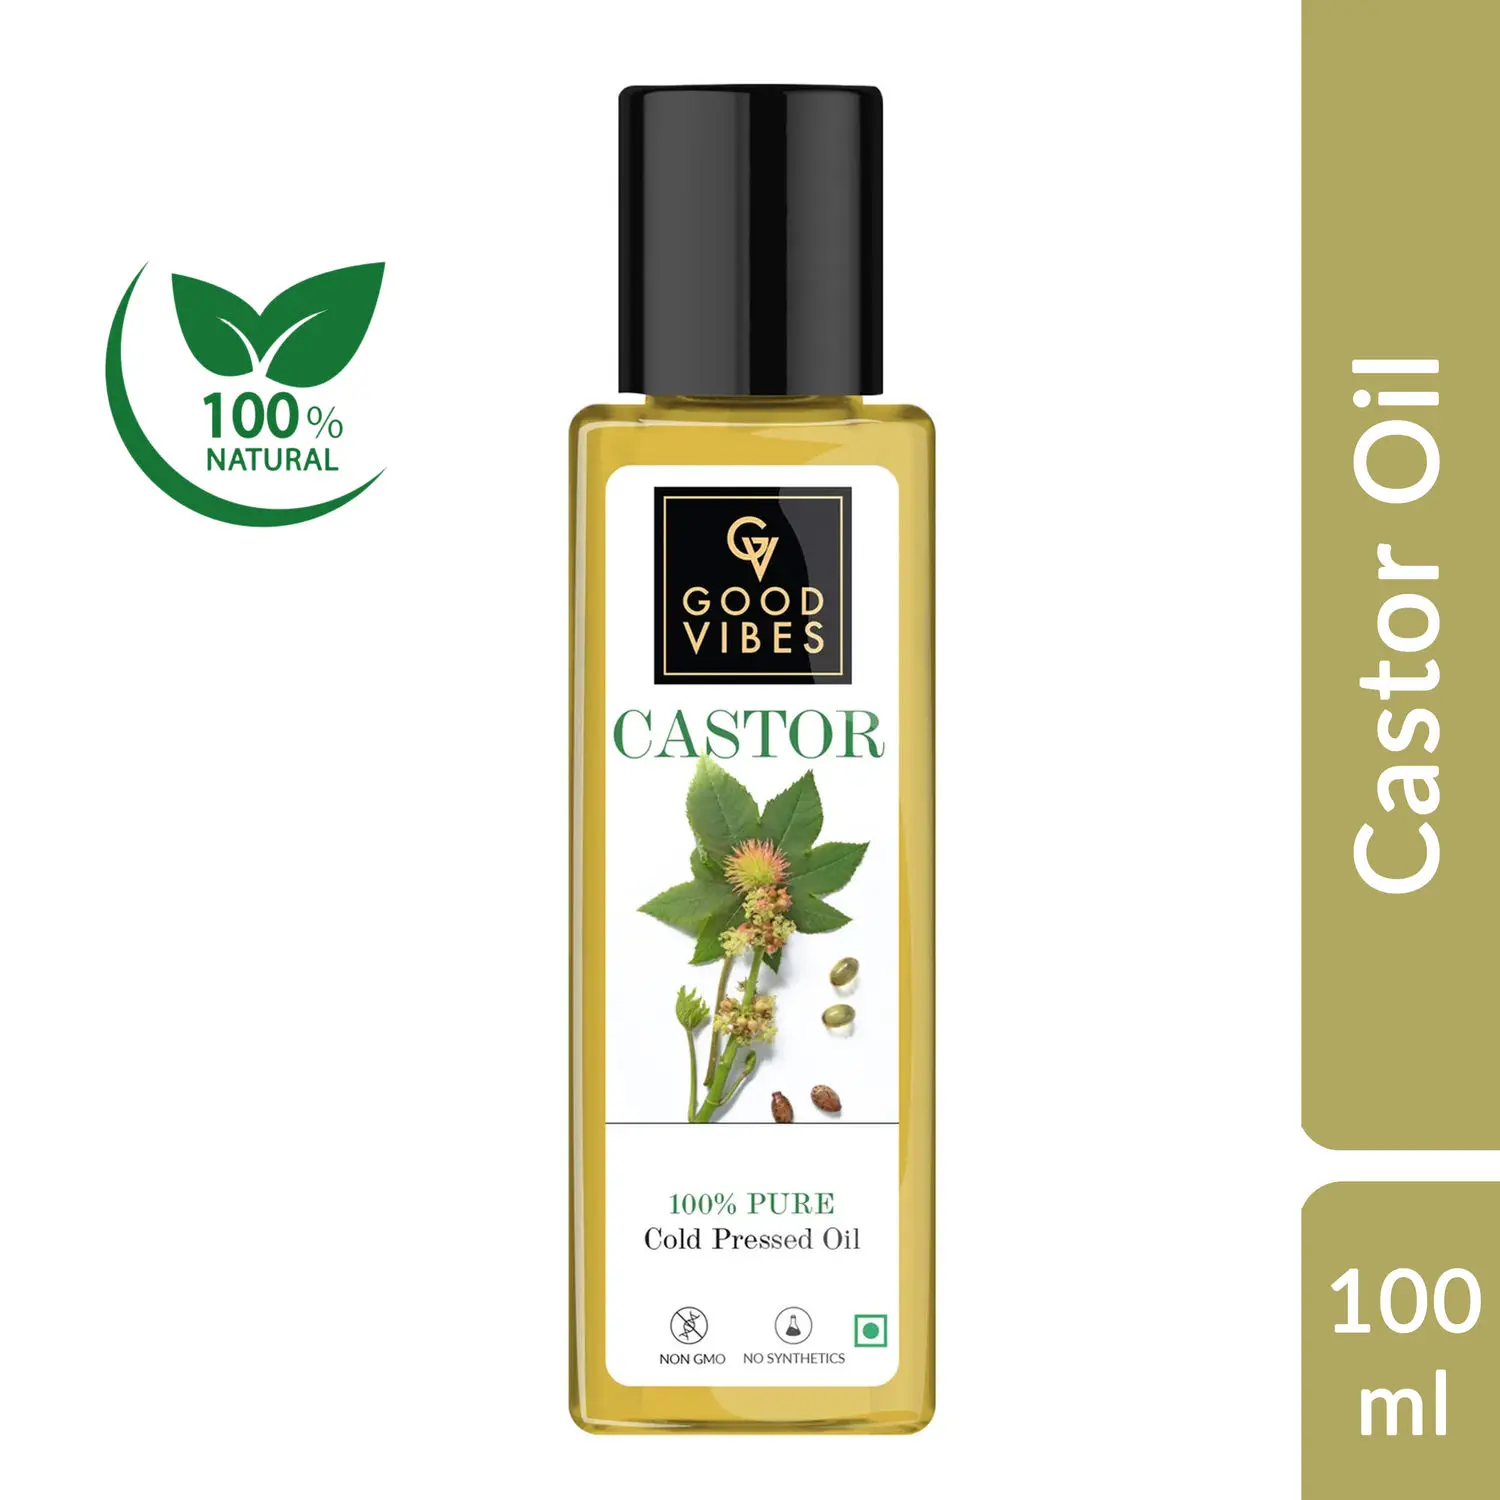 Good Vibes Castor 100% Pure Cold Pressed Oil For Hair & Skin | Moisturizing, Hair Growth | No Parabens, No Sulphates, No Mineral Oil (100 ml)